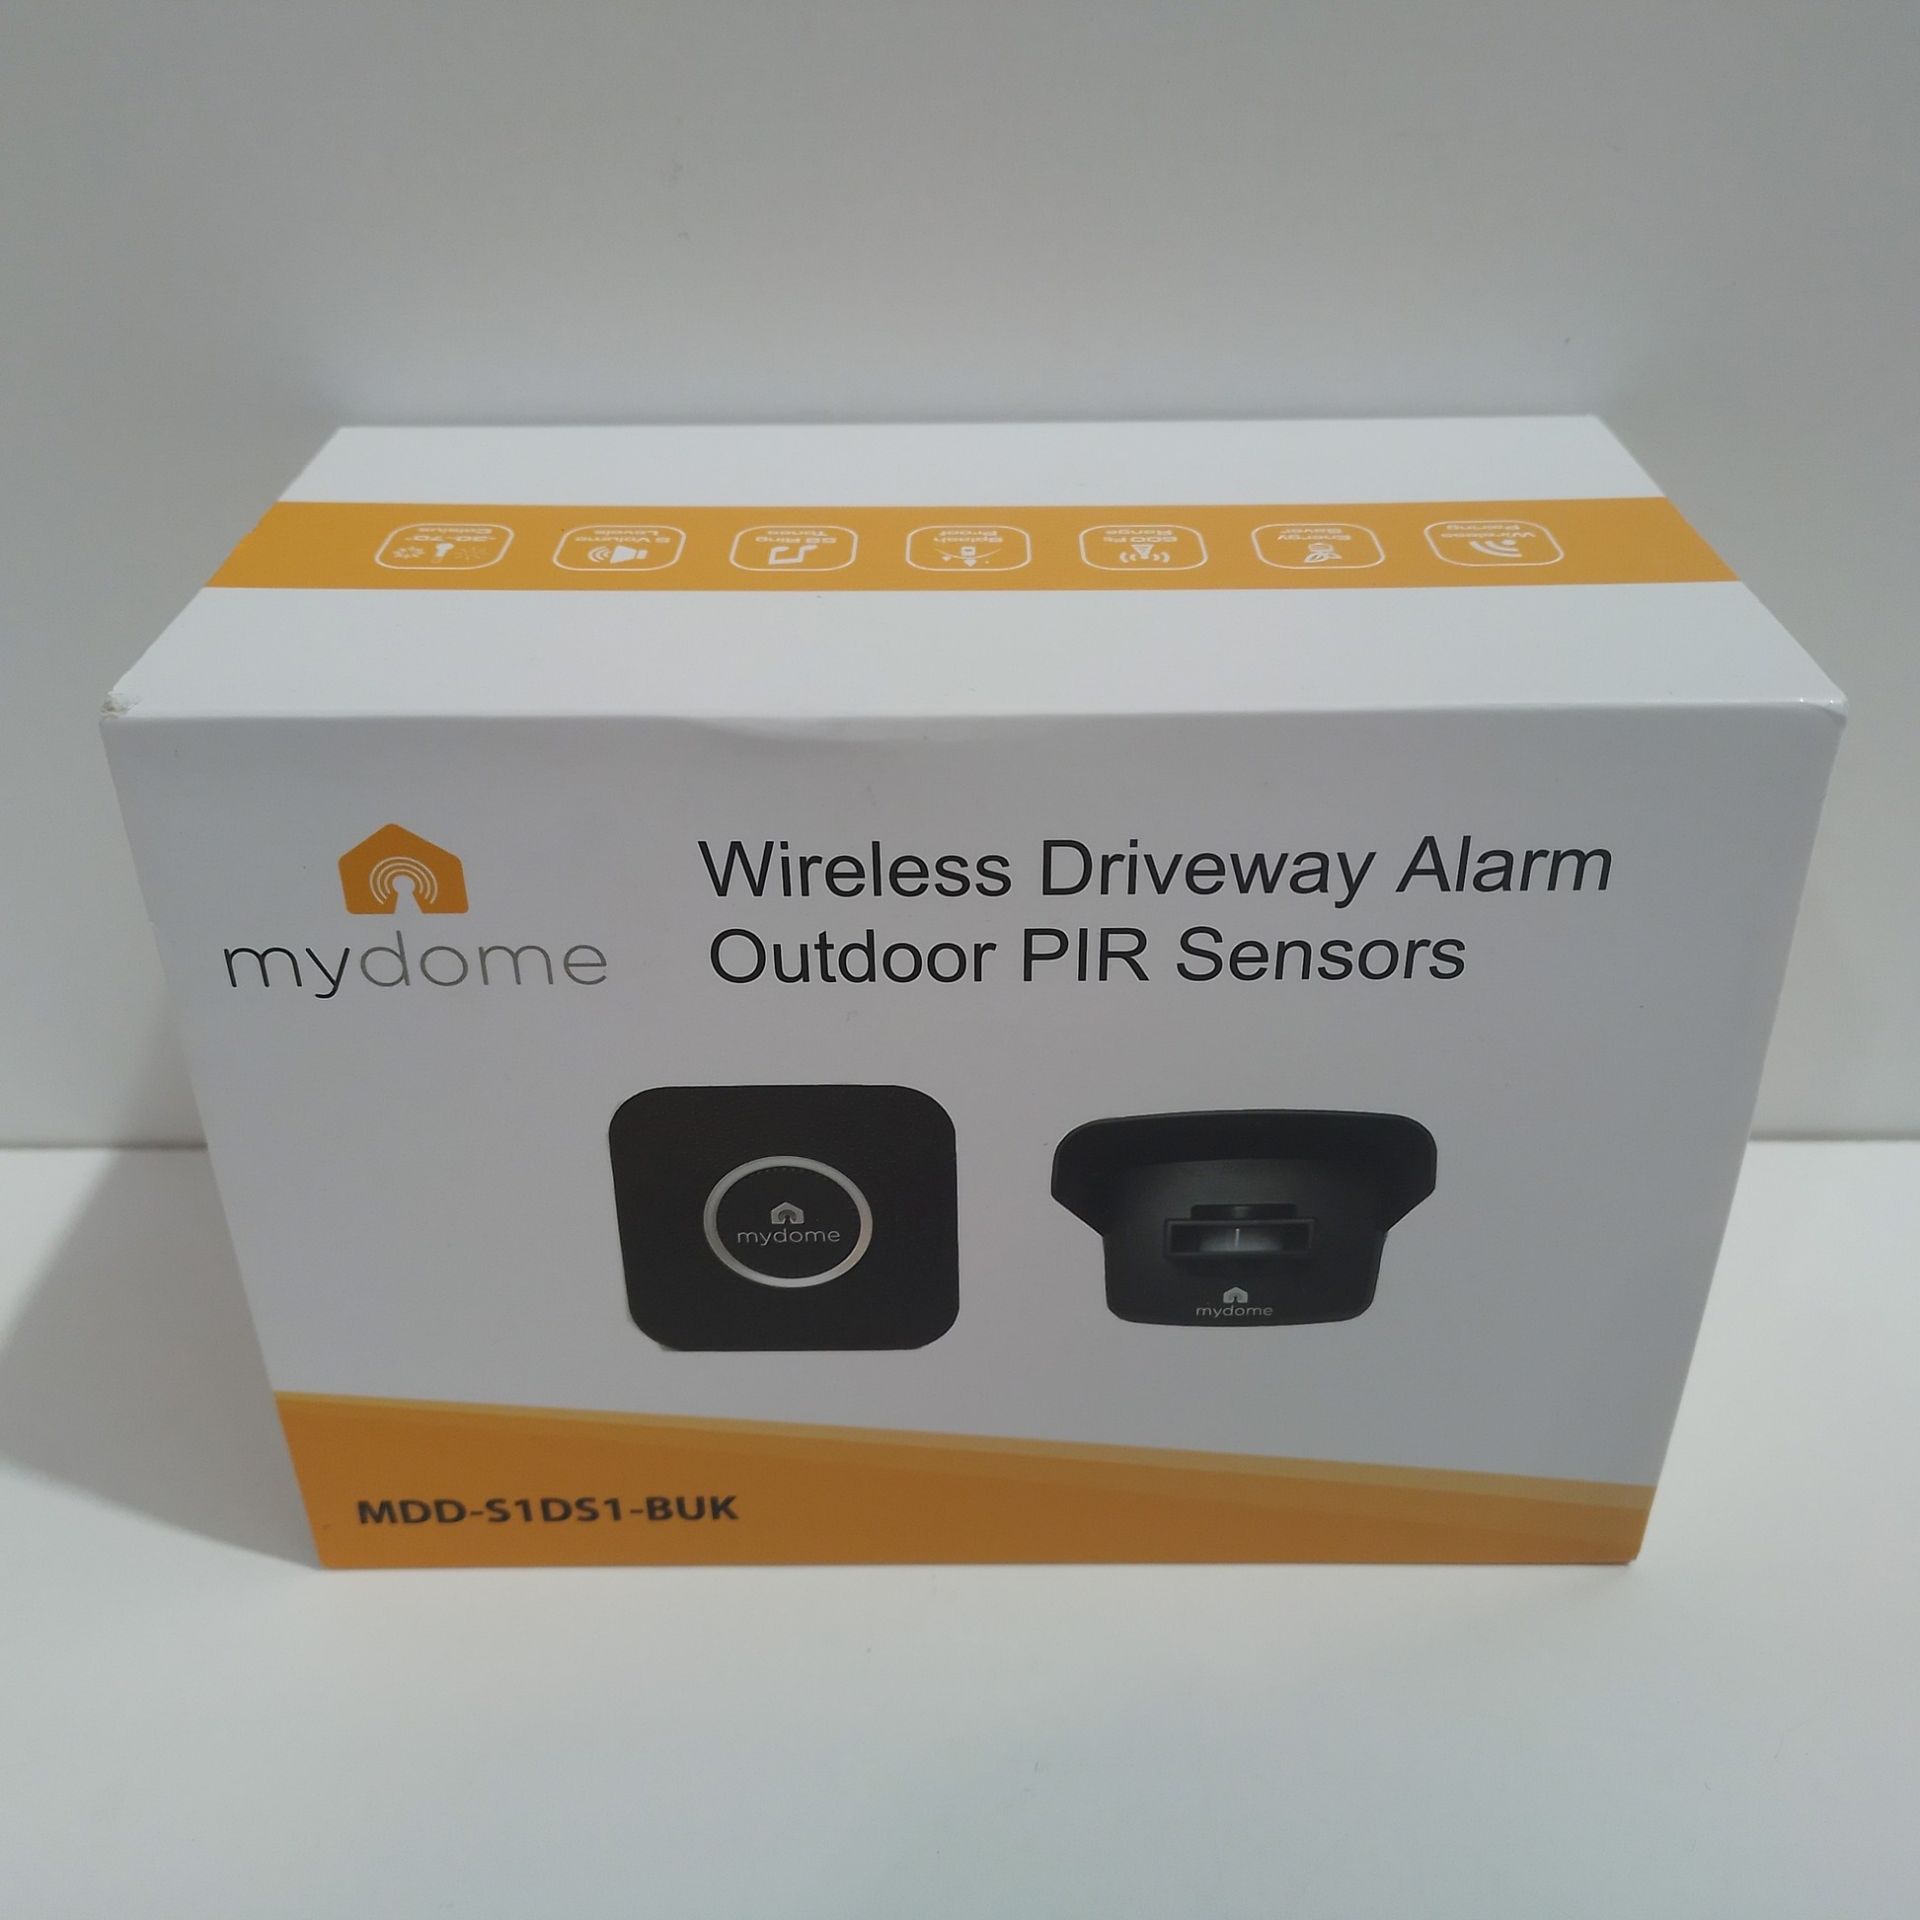 RRP £33.49 Mydome Wireless Driveway Motion Alarm | DIY Home Security - Image 2 of 2